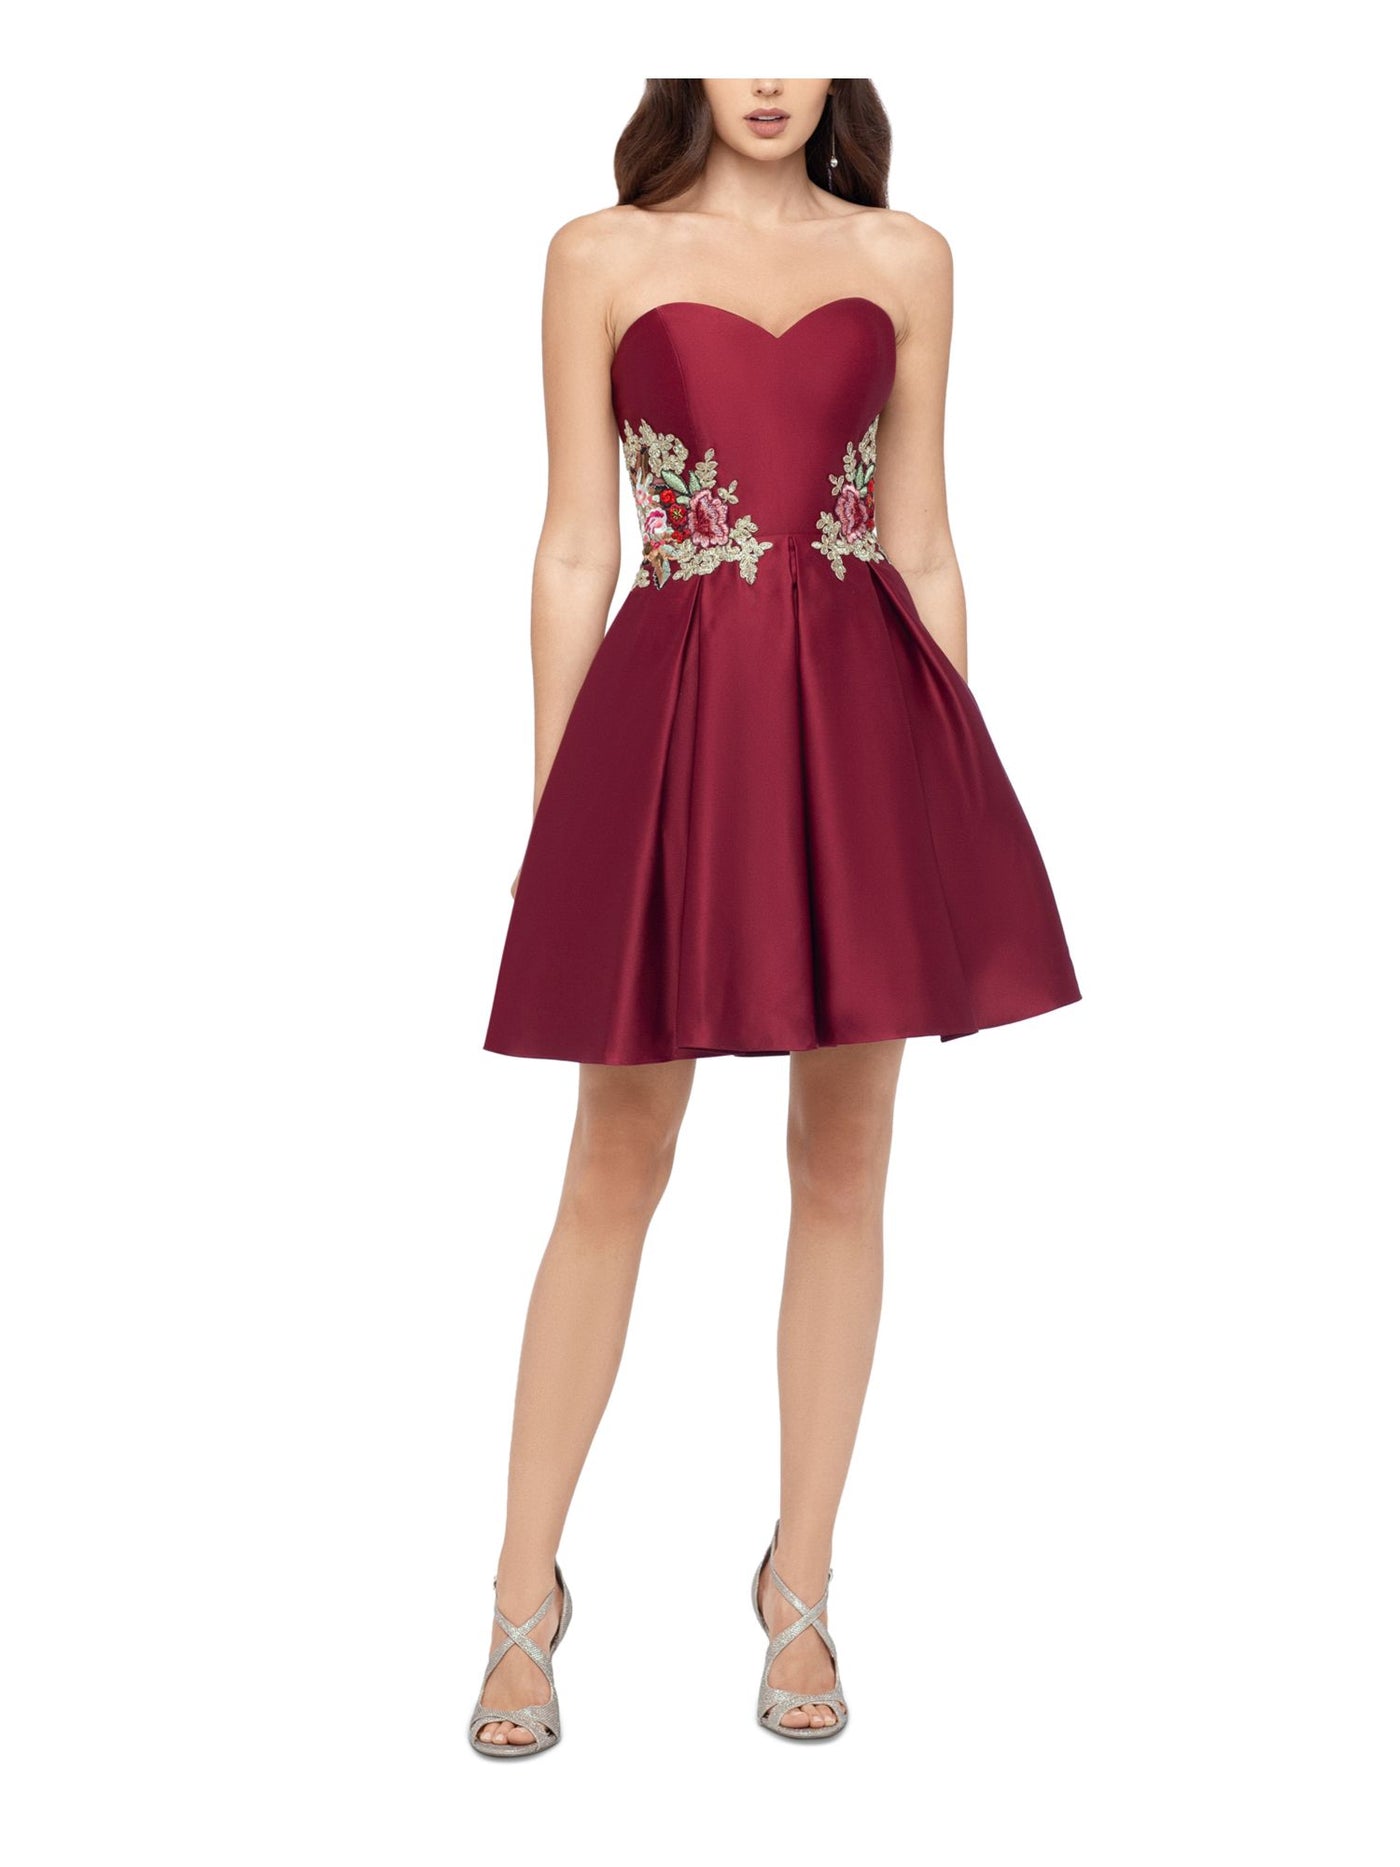 BLONDIE Womens Embellished Sweetheart Neckline Above The Knee Party Fit + Flare Dress